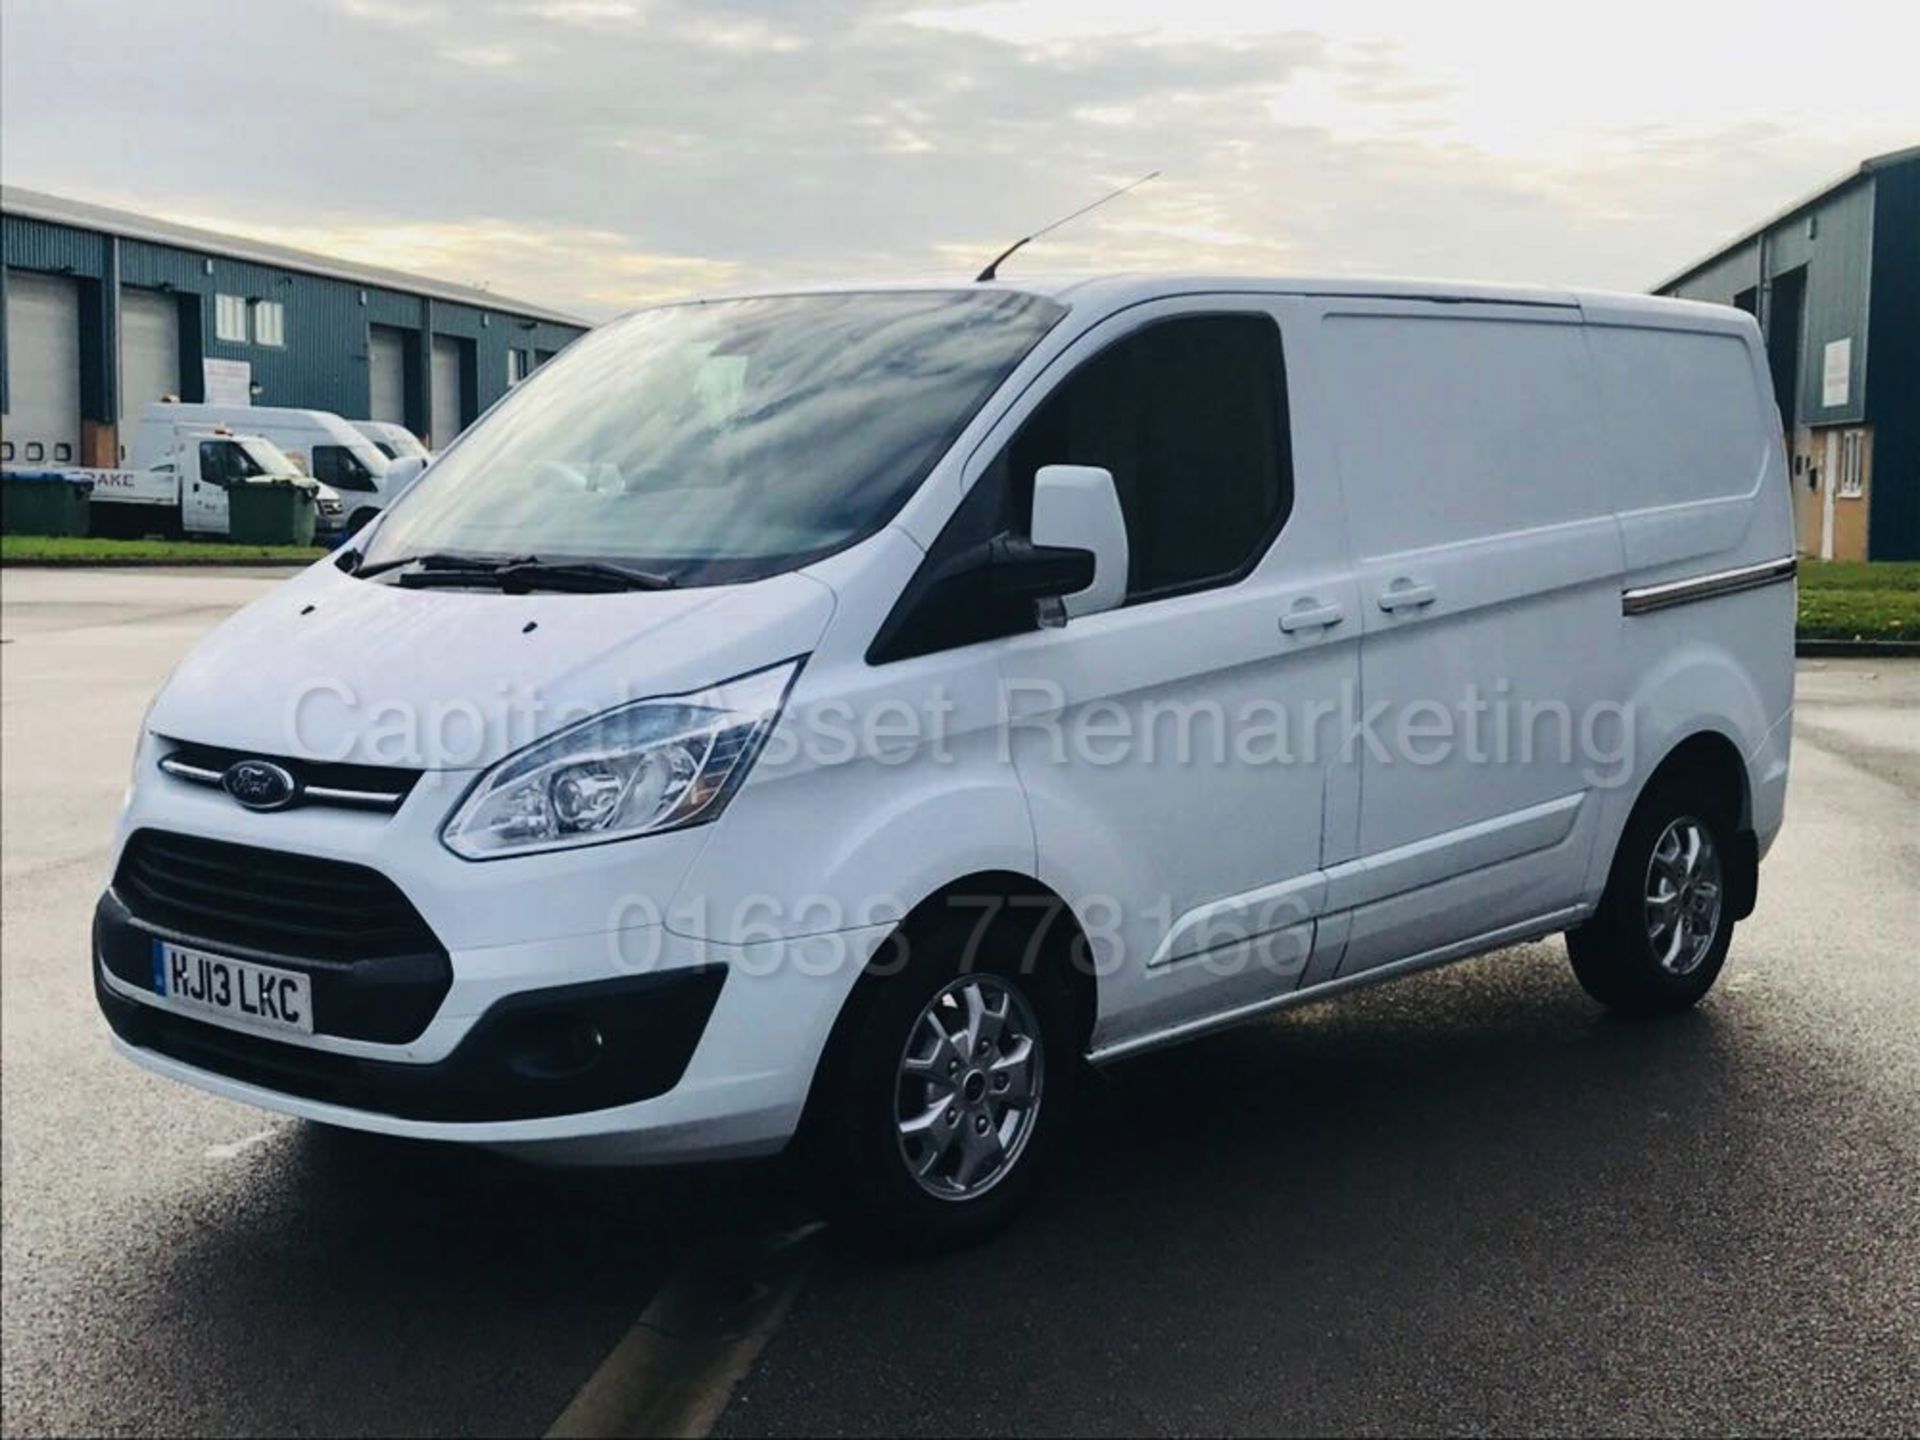 (On Sale) FORD TRANSIT CUSTOM 'LIMITED SPEC' (2013 - NEW MODEL) '2.2 TDCI - 6 SPEED' *A/C* (NO VAT) - Image 3 of 32